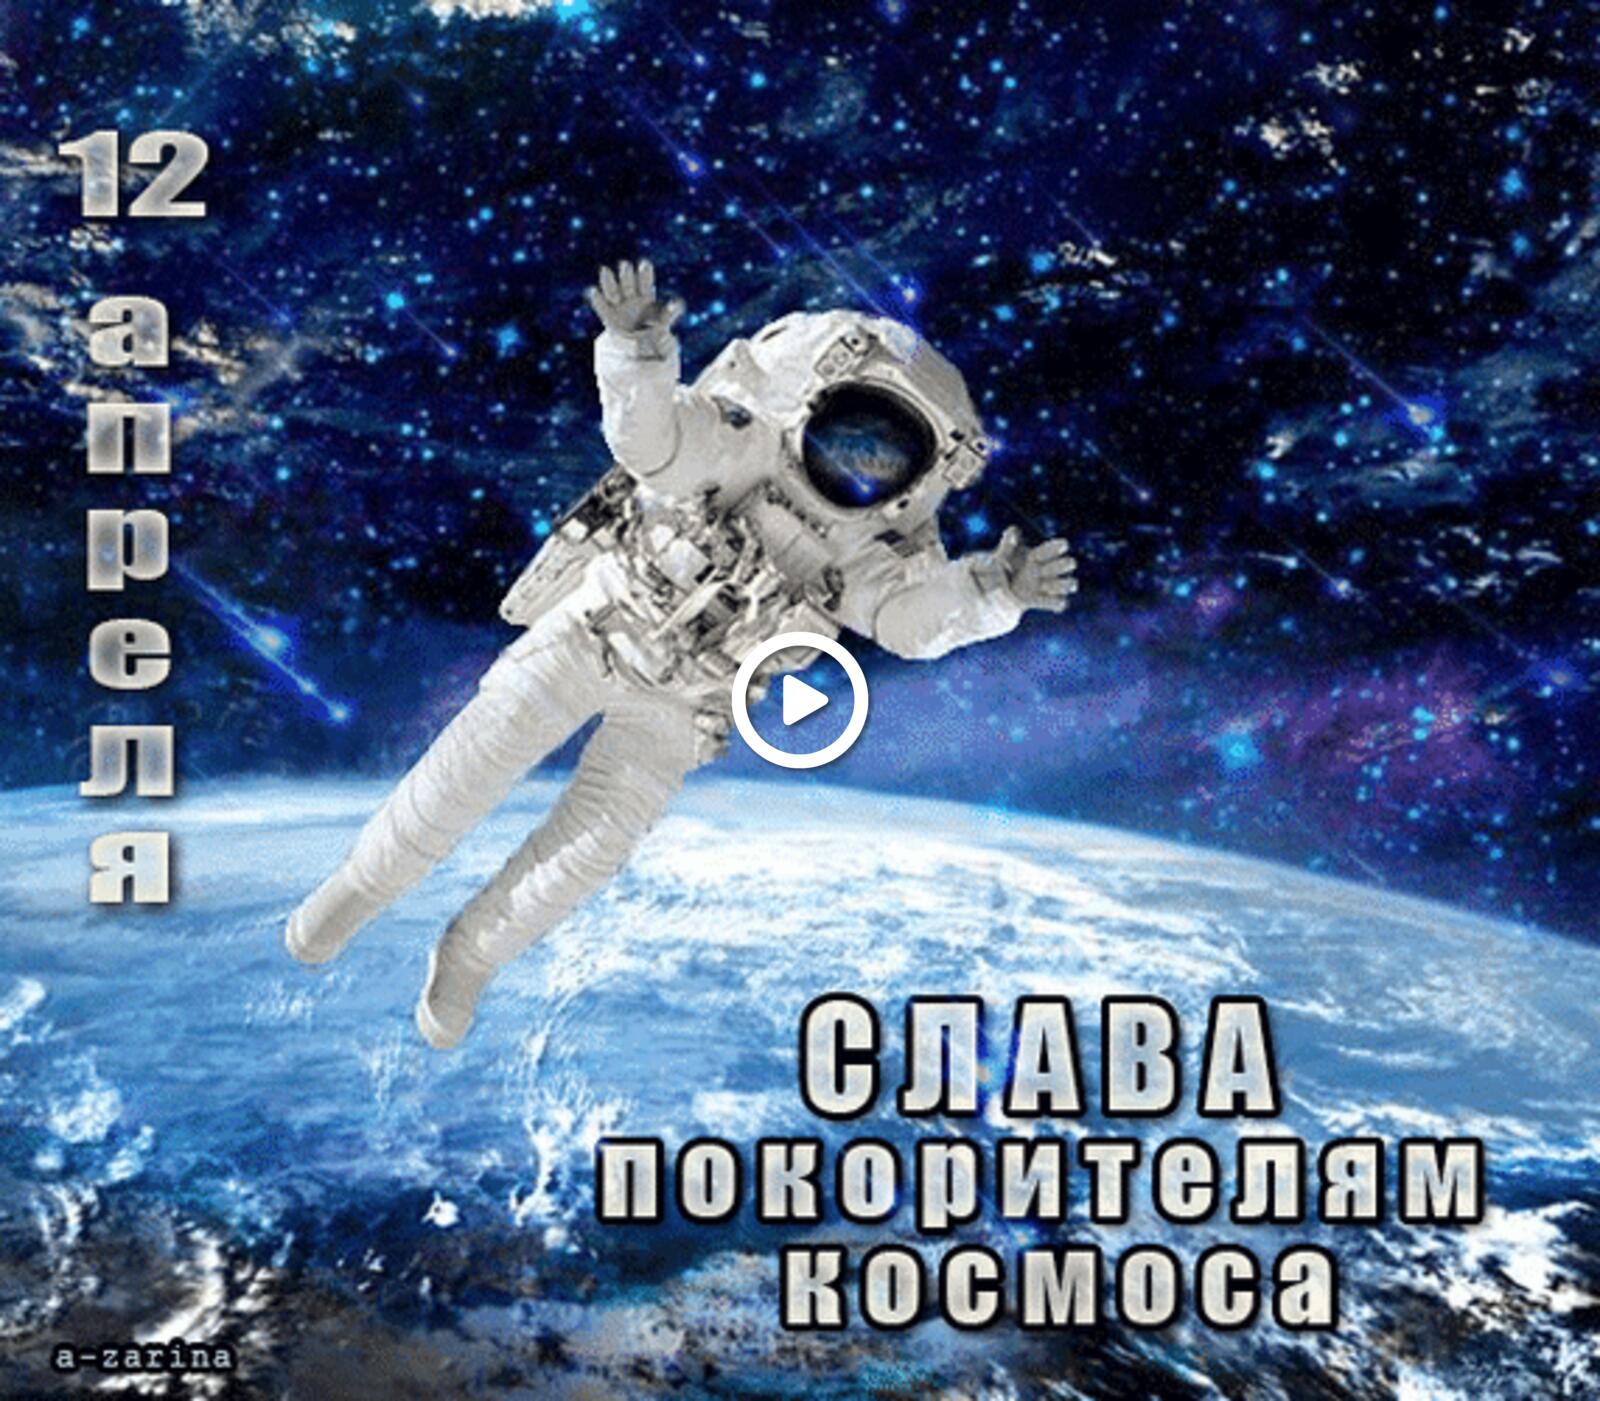 A postcard on the subject of april 12 cosmonaut space for free